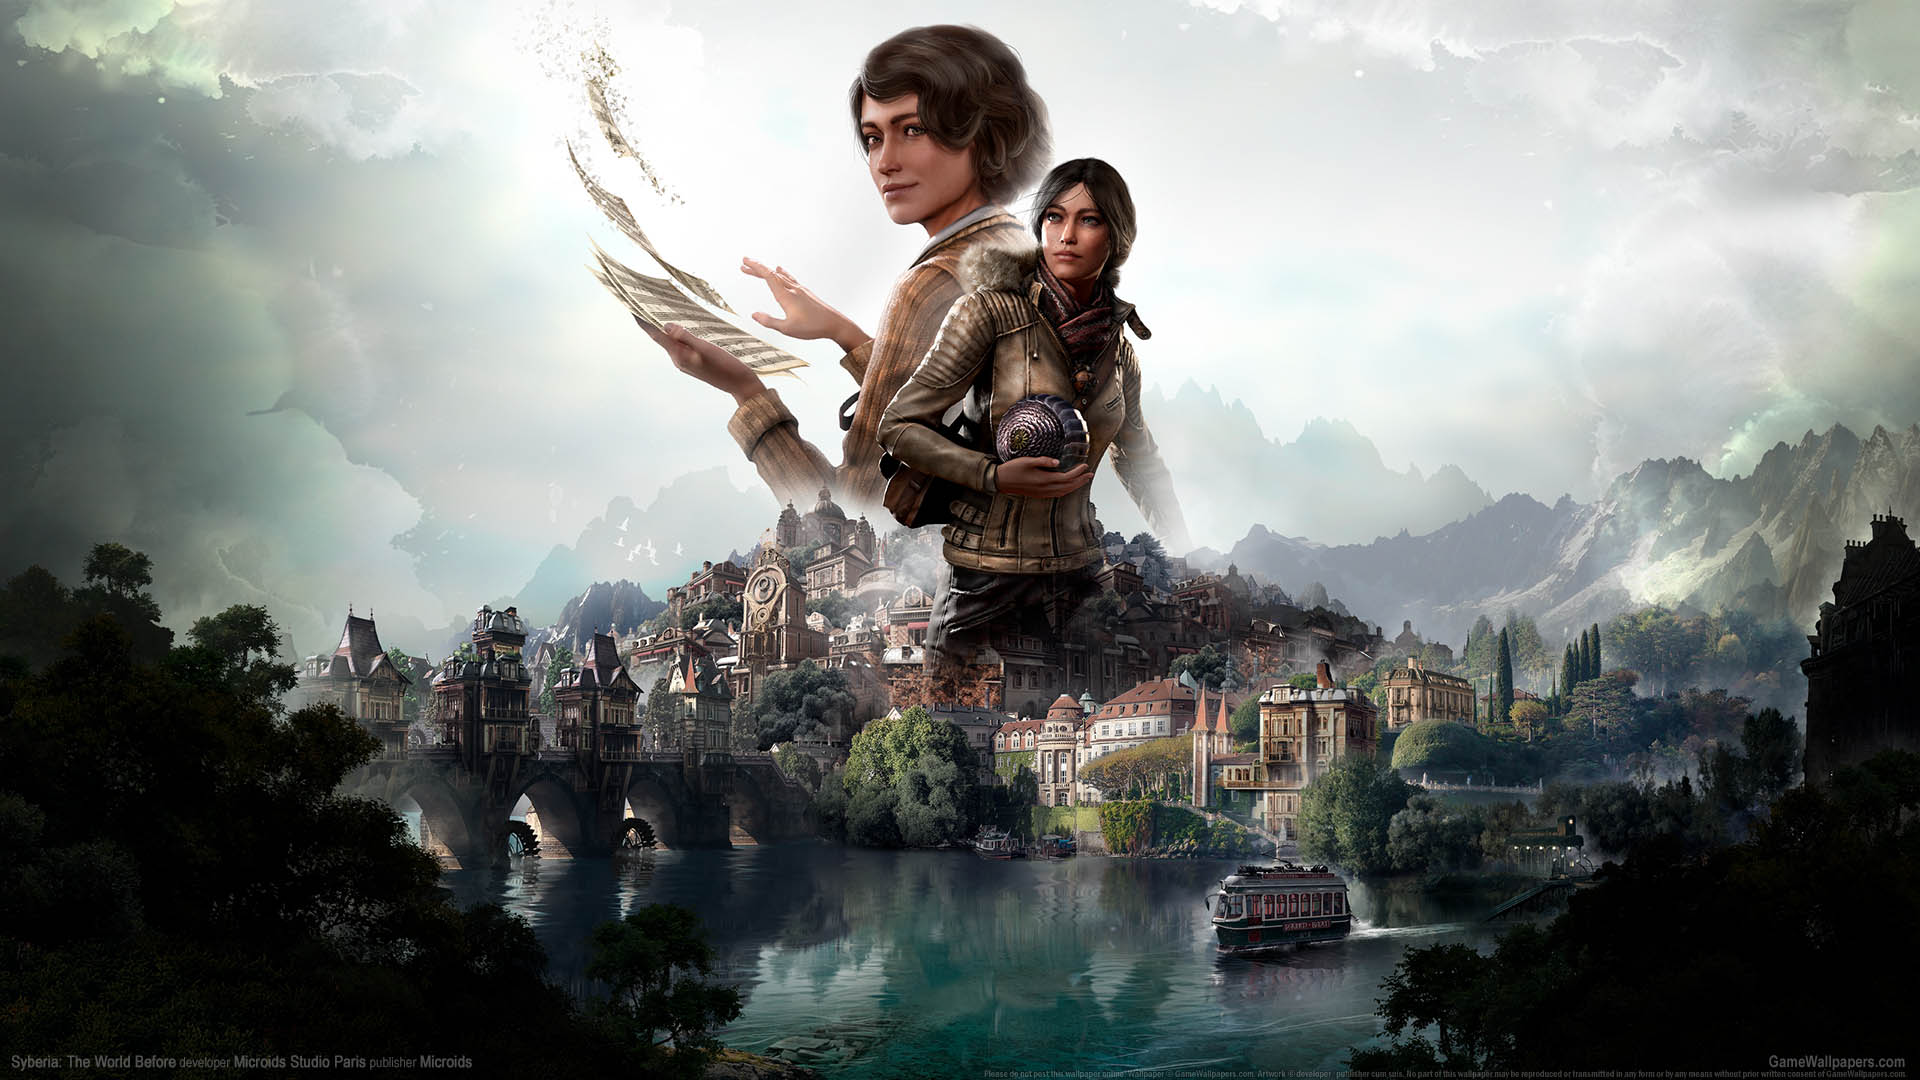 Syberia: The World Before achtergrond 01 1920x1080